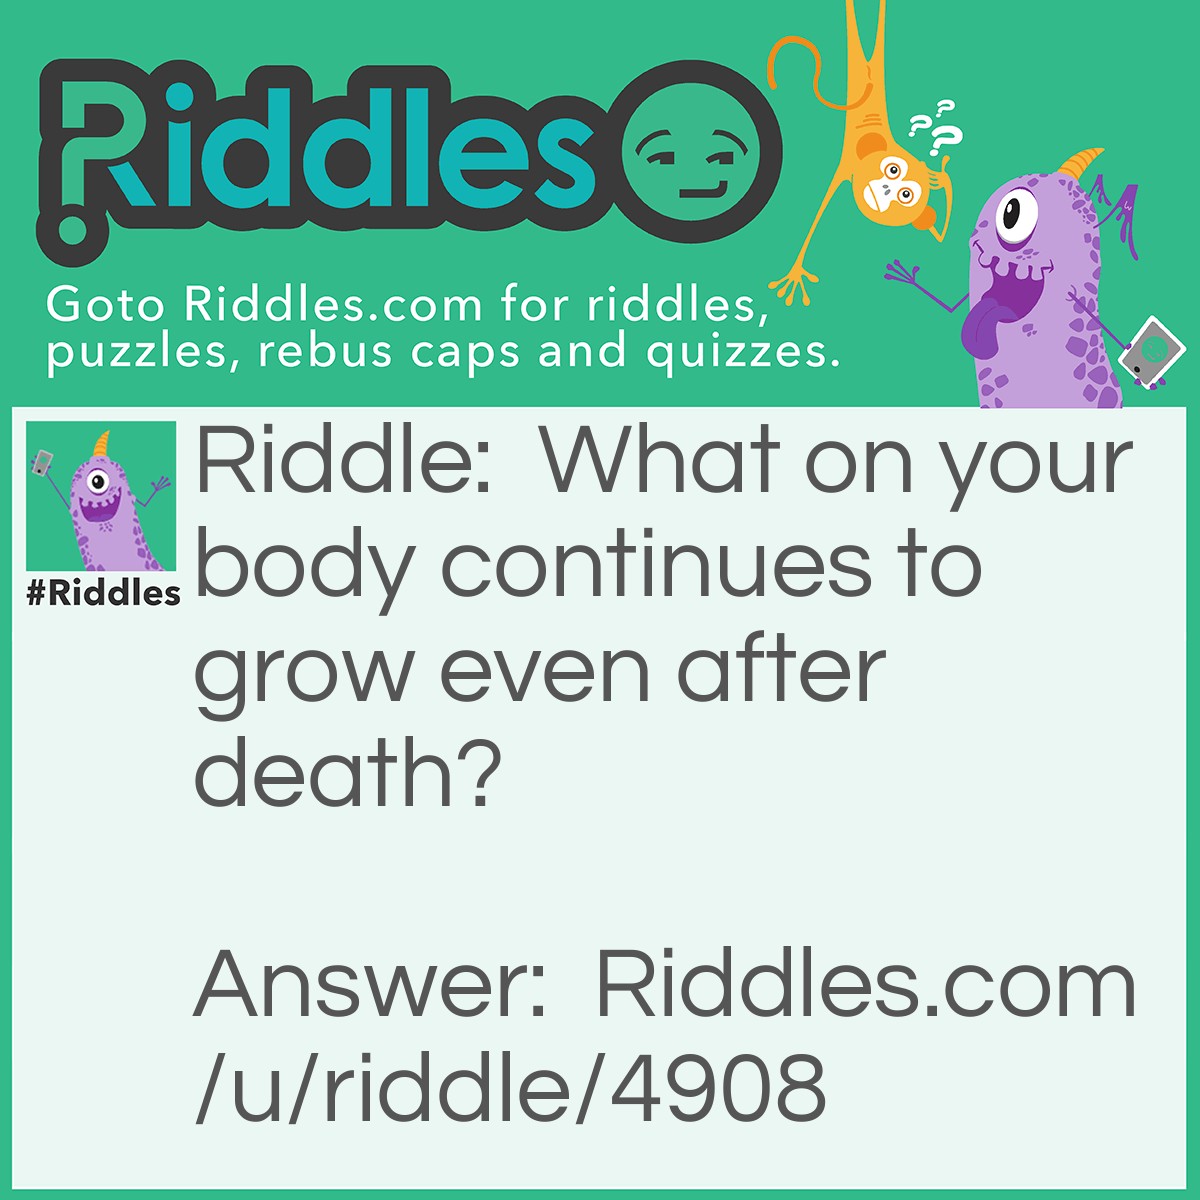 Riddle: What on your body continues to grow even after death? Answer: Hair.